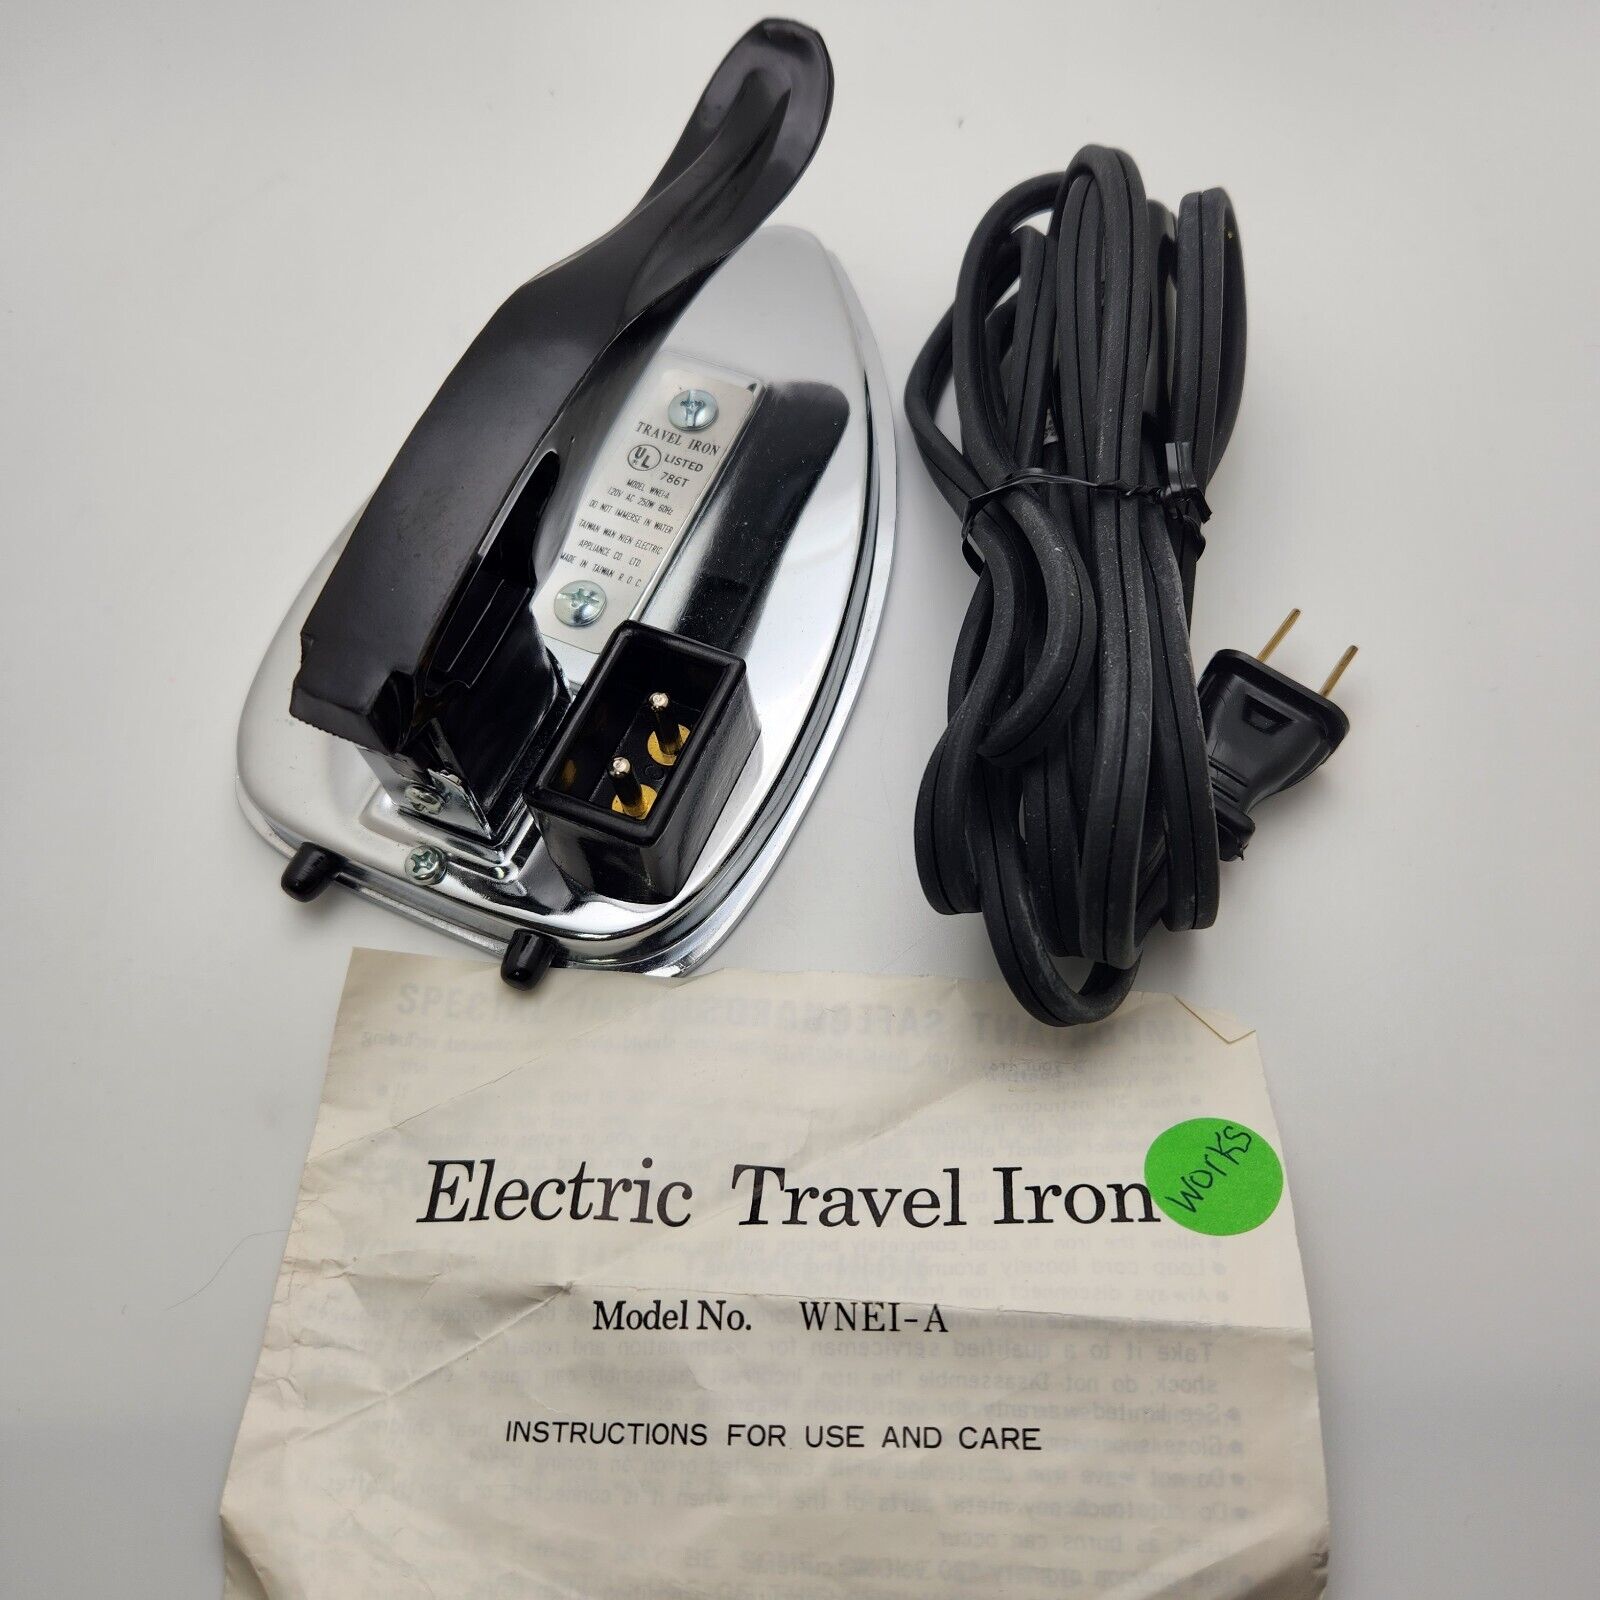 Vintage 1970's Folding Travel Iron Model-WNEI-A Stainless Steel Electric 